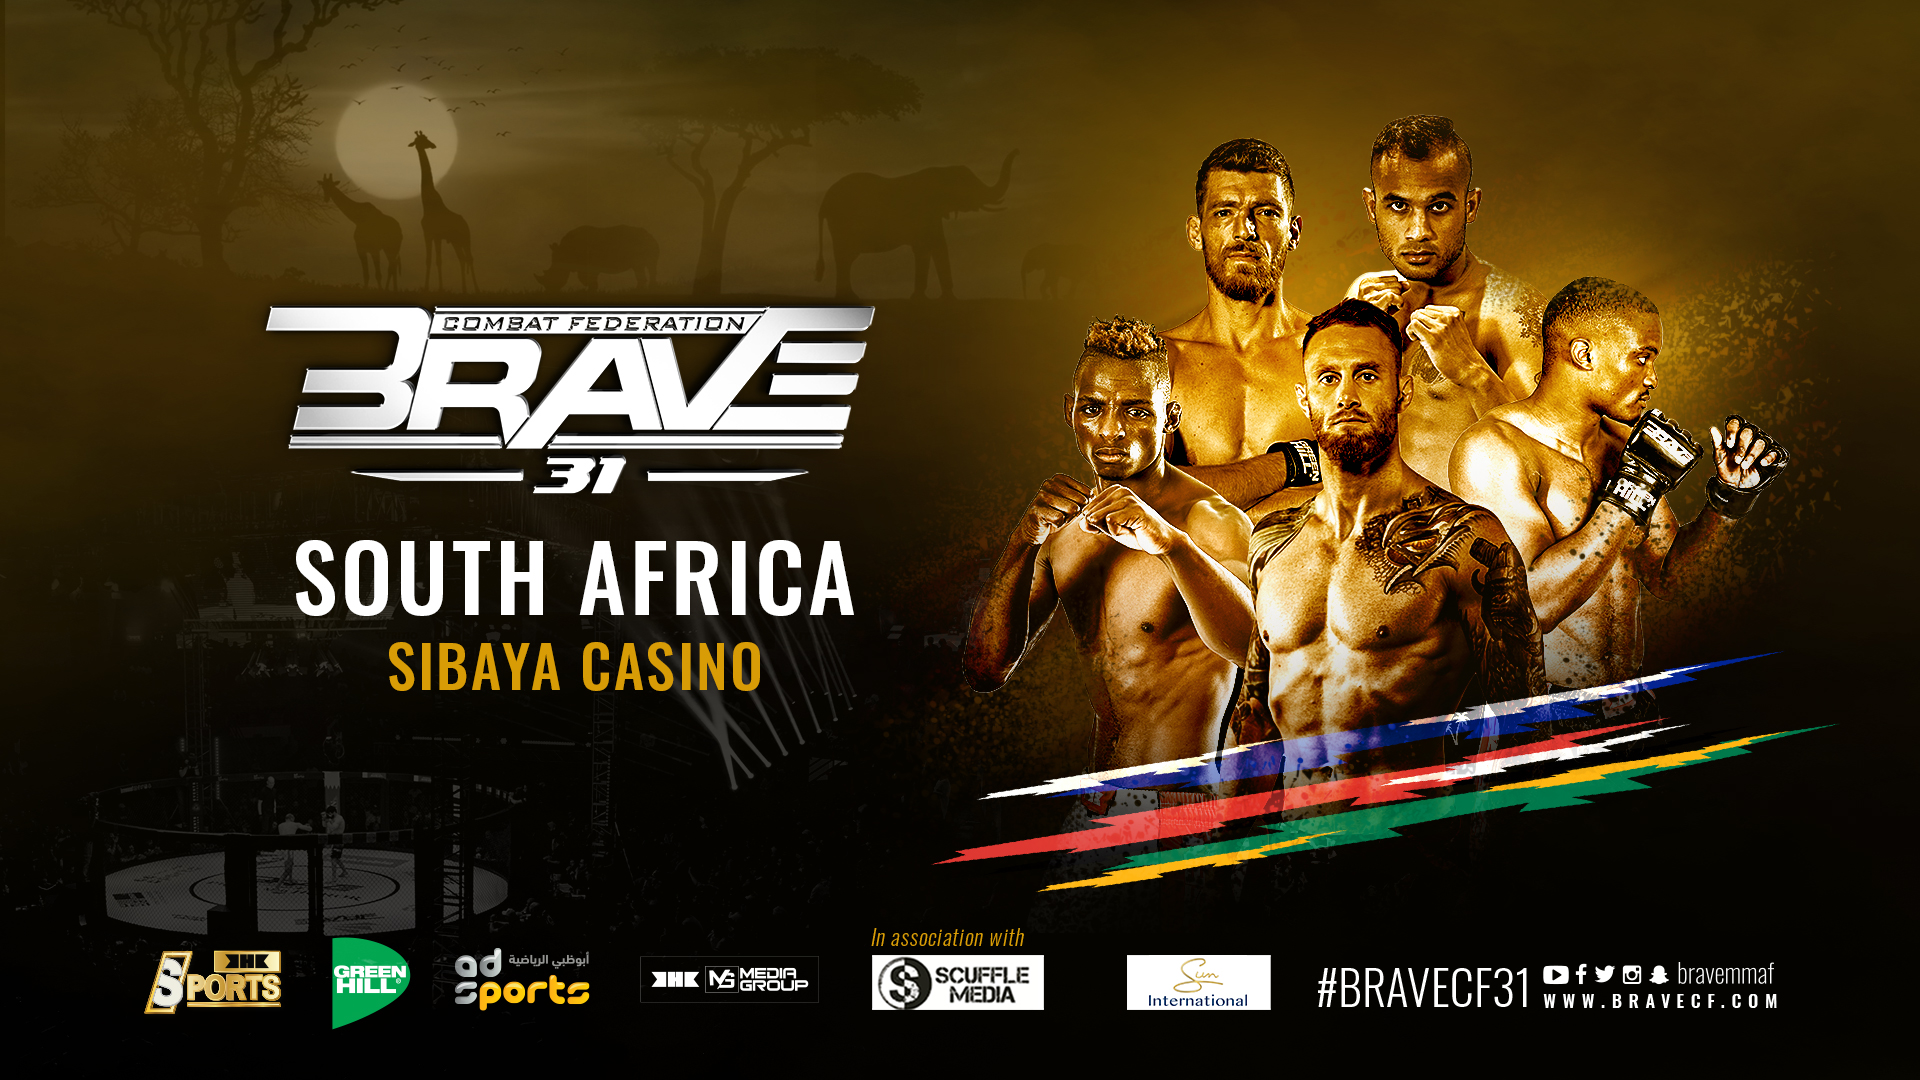 BRAVE CF returns to South Africa with an explosive fight card - BRAVE CF